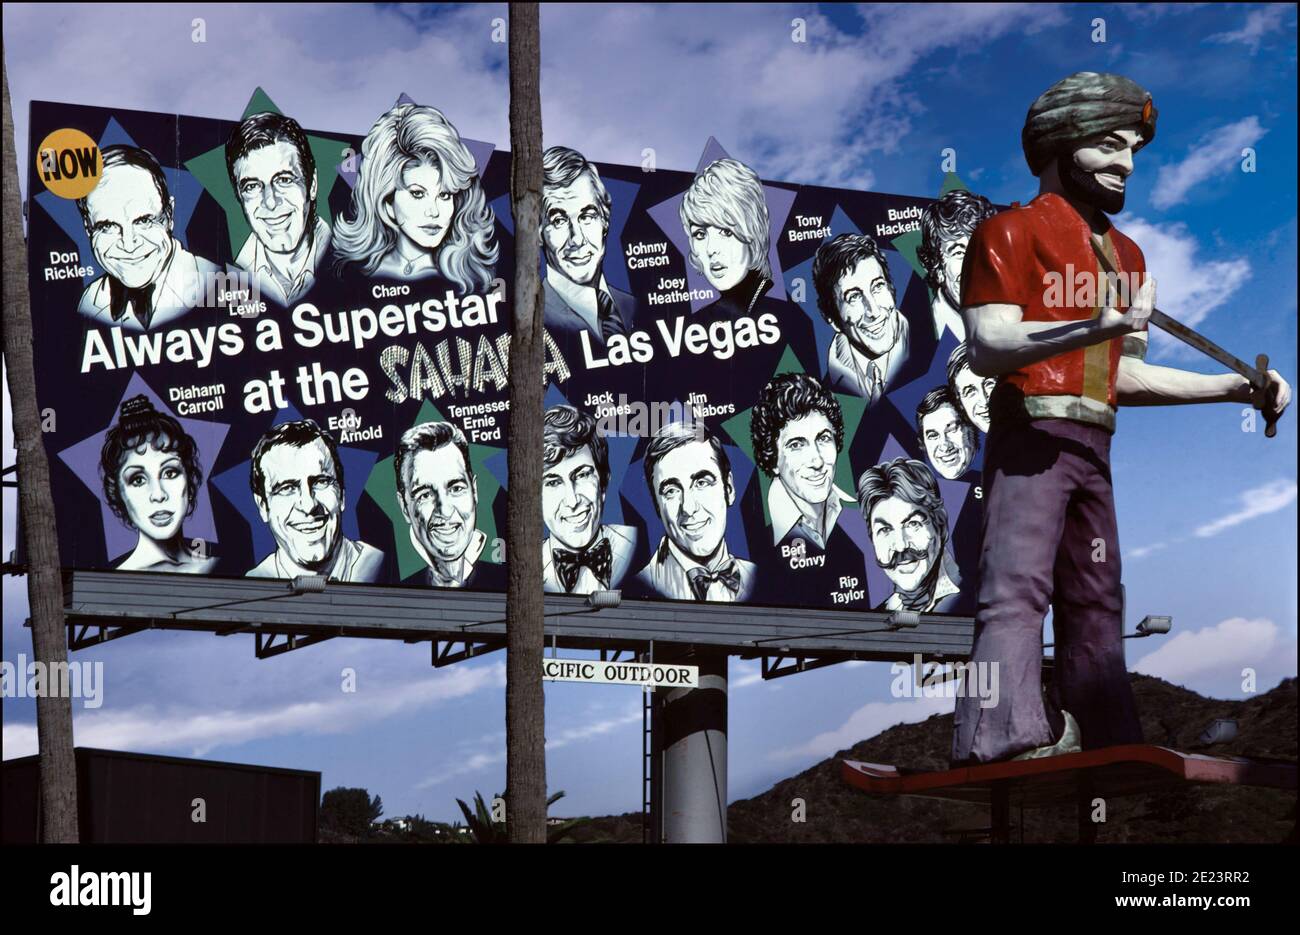 A billboard on the Sunset Strip in Los Angeles promotes travel to the Sahara Hotel in Las Vegas with Superstar performers circa 1979. Stock Photo